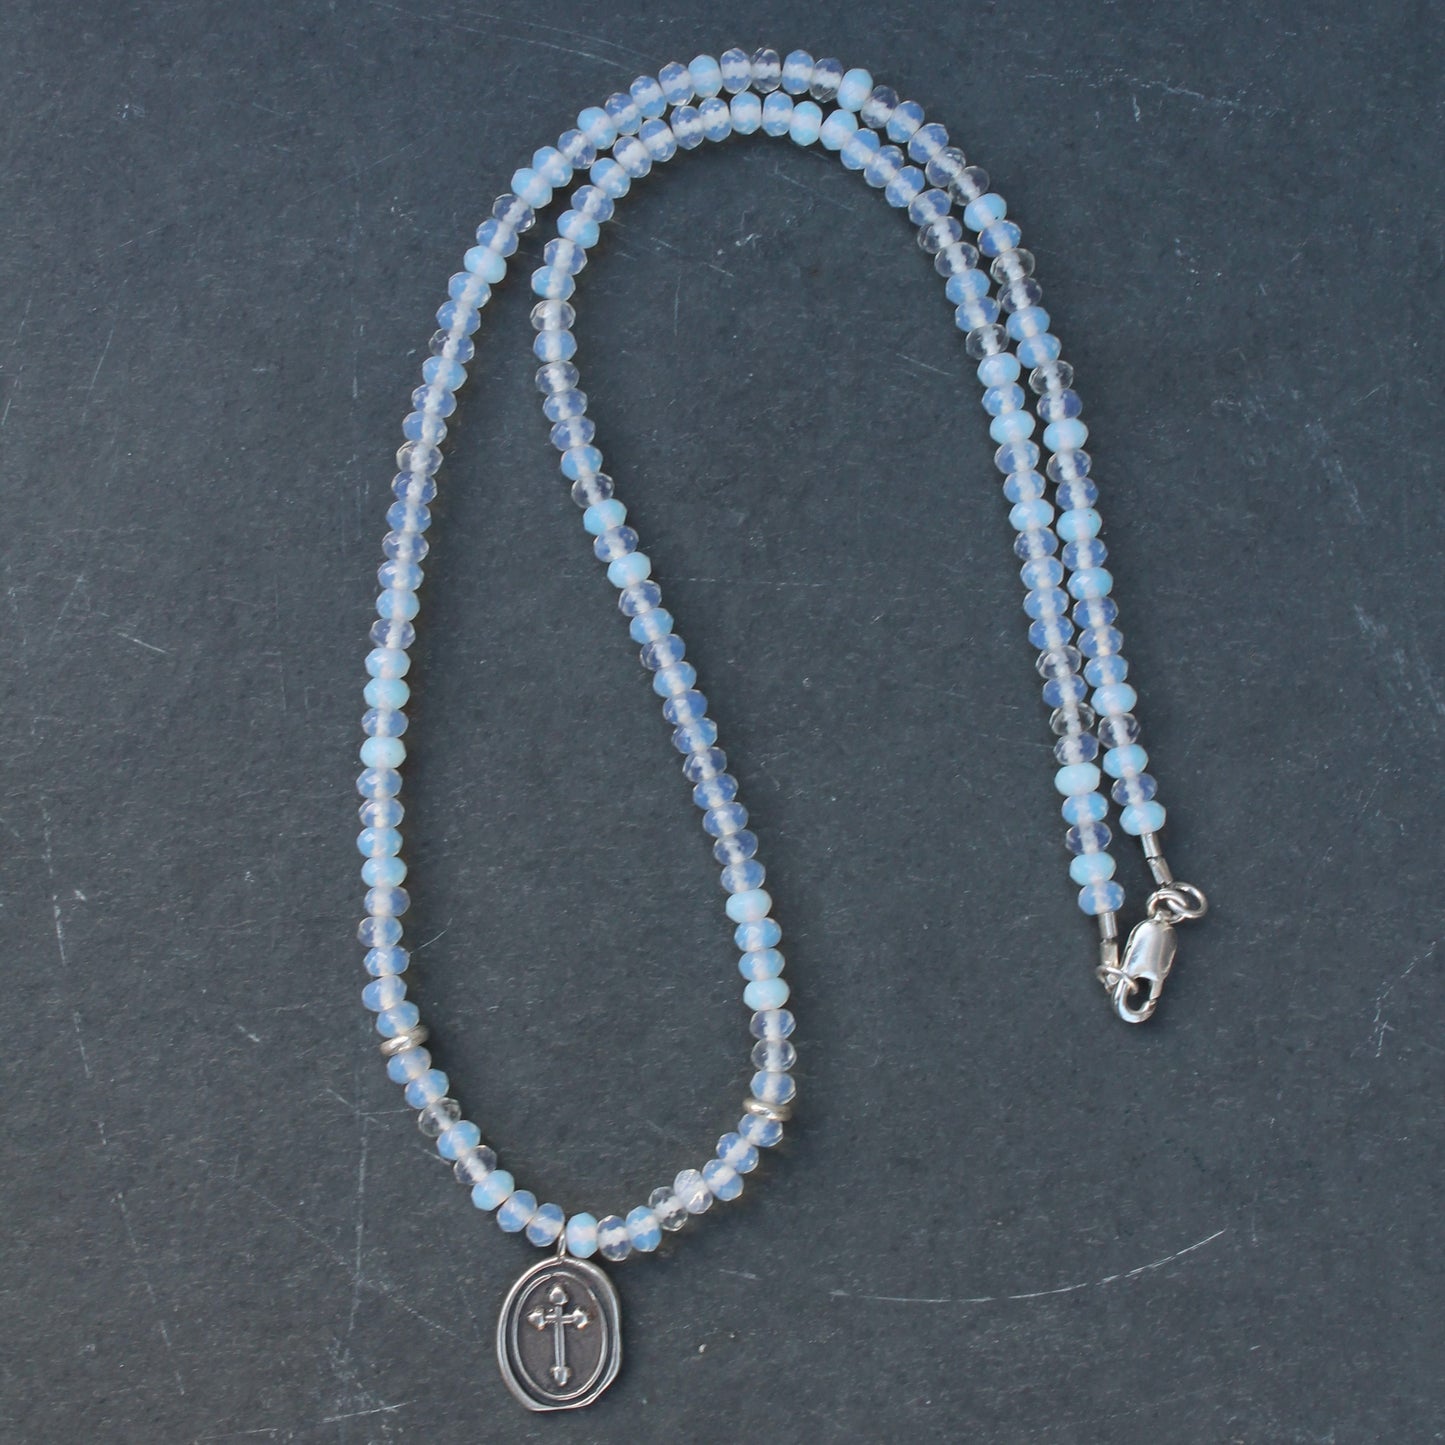 Milky White Opalite with Sterling Silver Cross